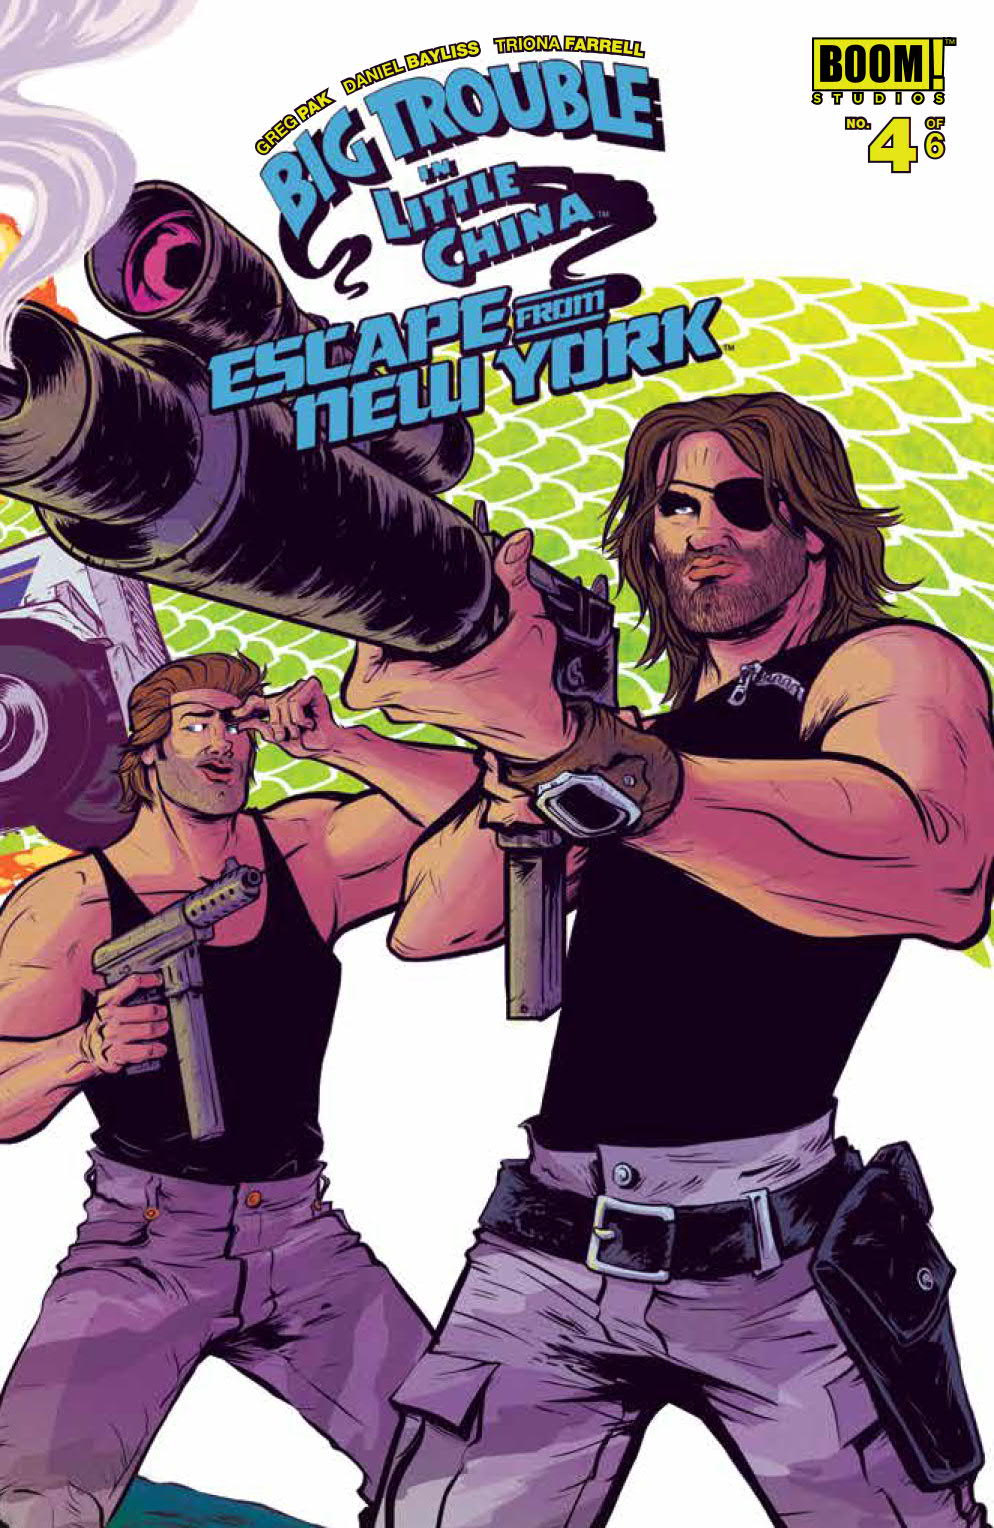 img - Big Trouble in Little China / Escape From New York #4